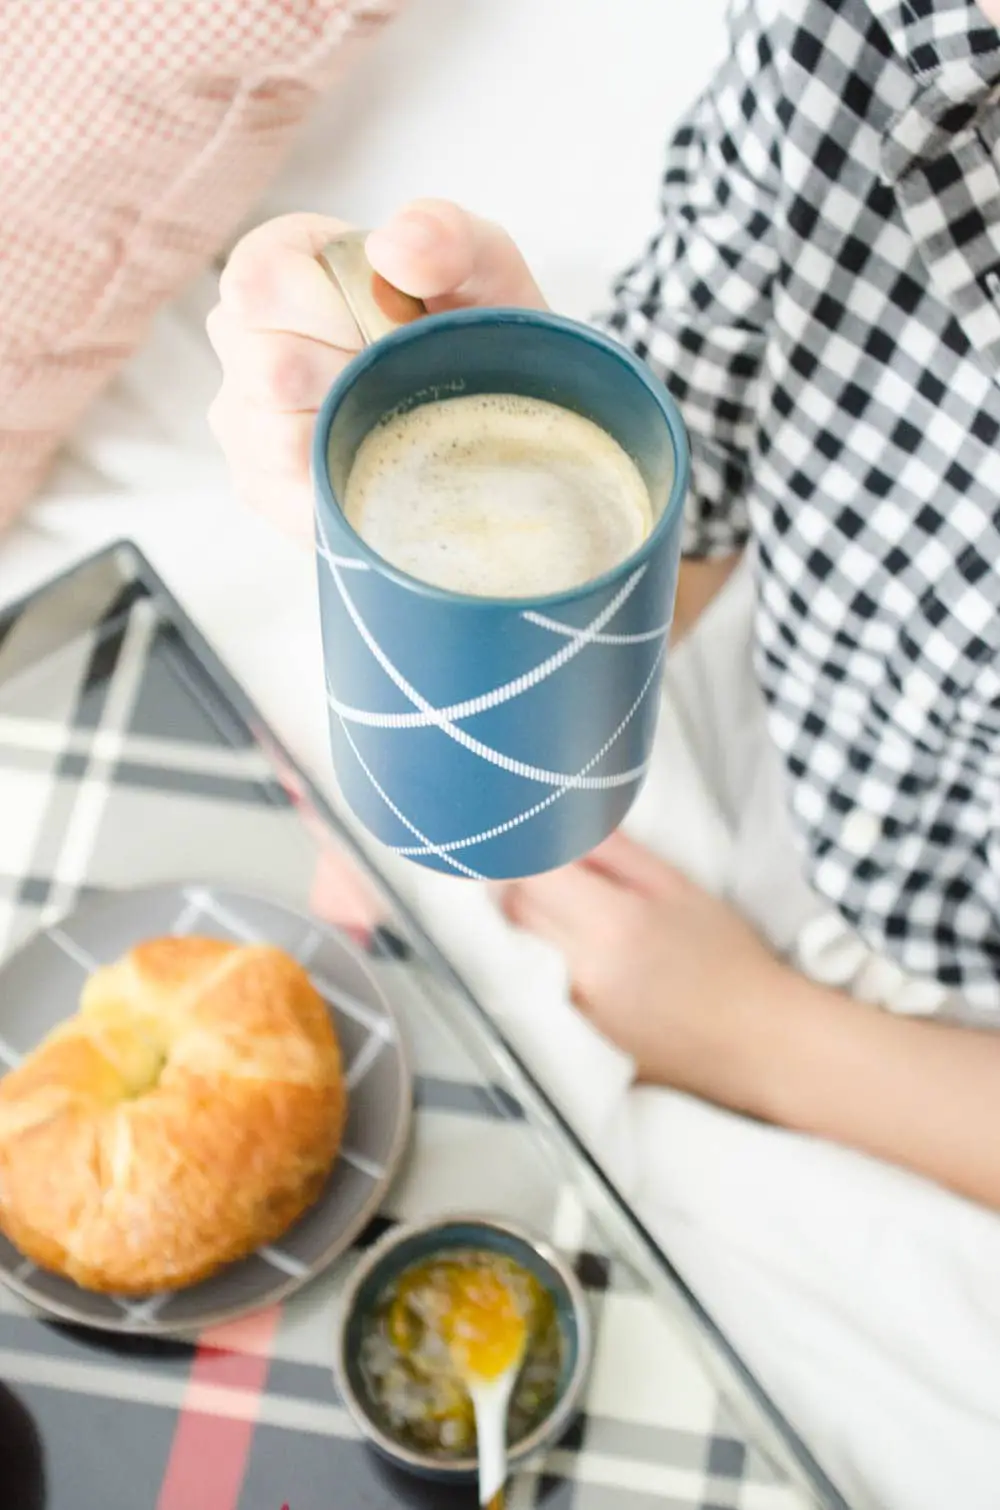 Cozy breakfast in bed with the new Target plaid collection on @thouswellblog